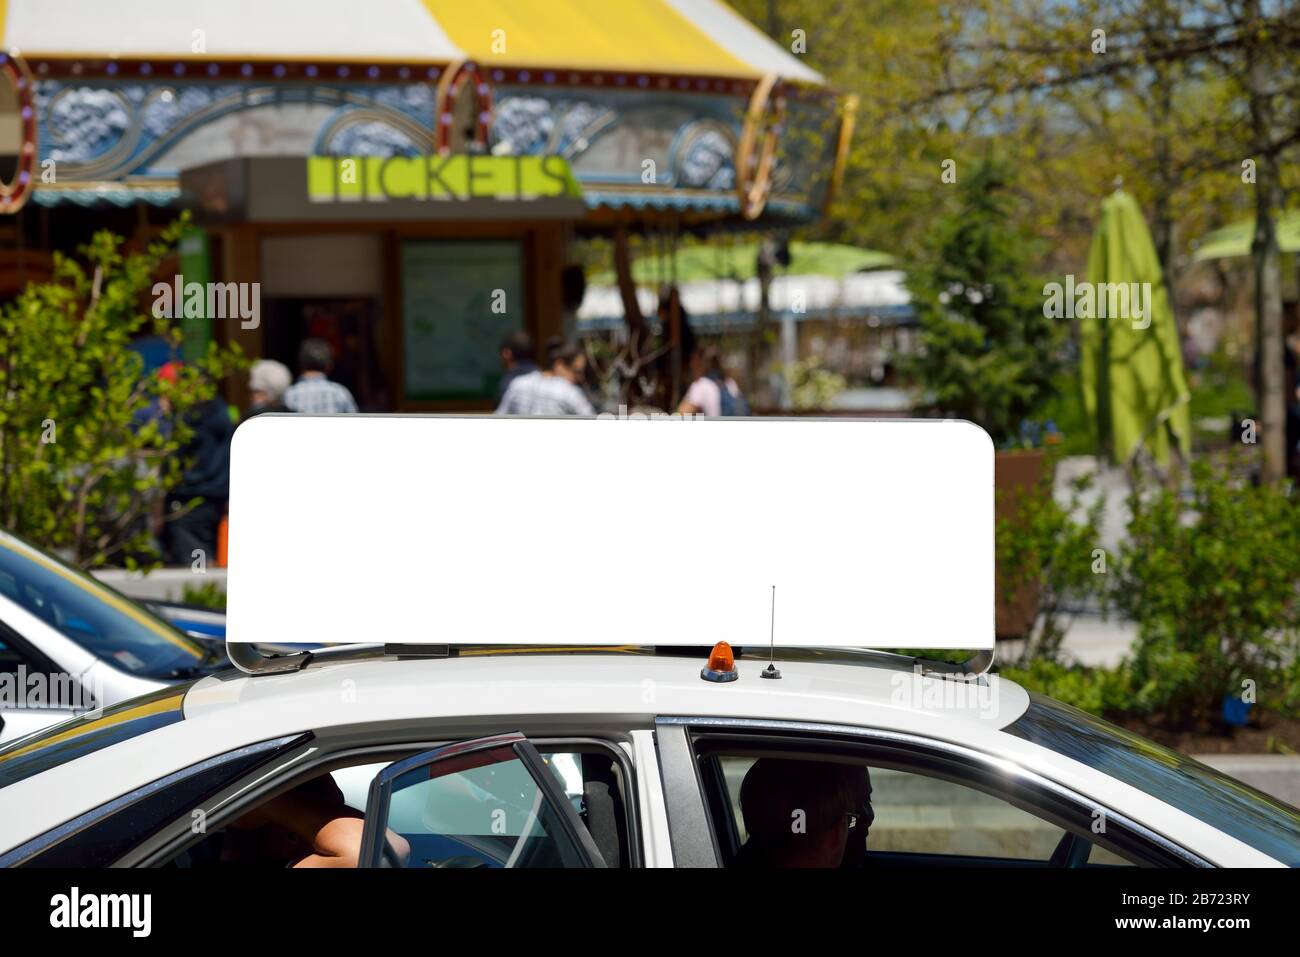 Taxi billboard, frontal view, urban background. Outdoor advertising in the city. Clipping path included. Stock Photo